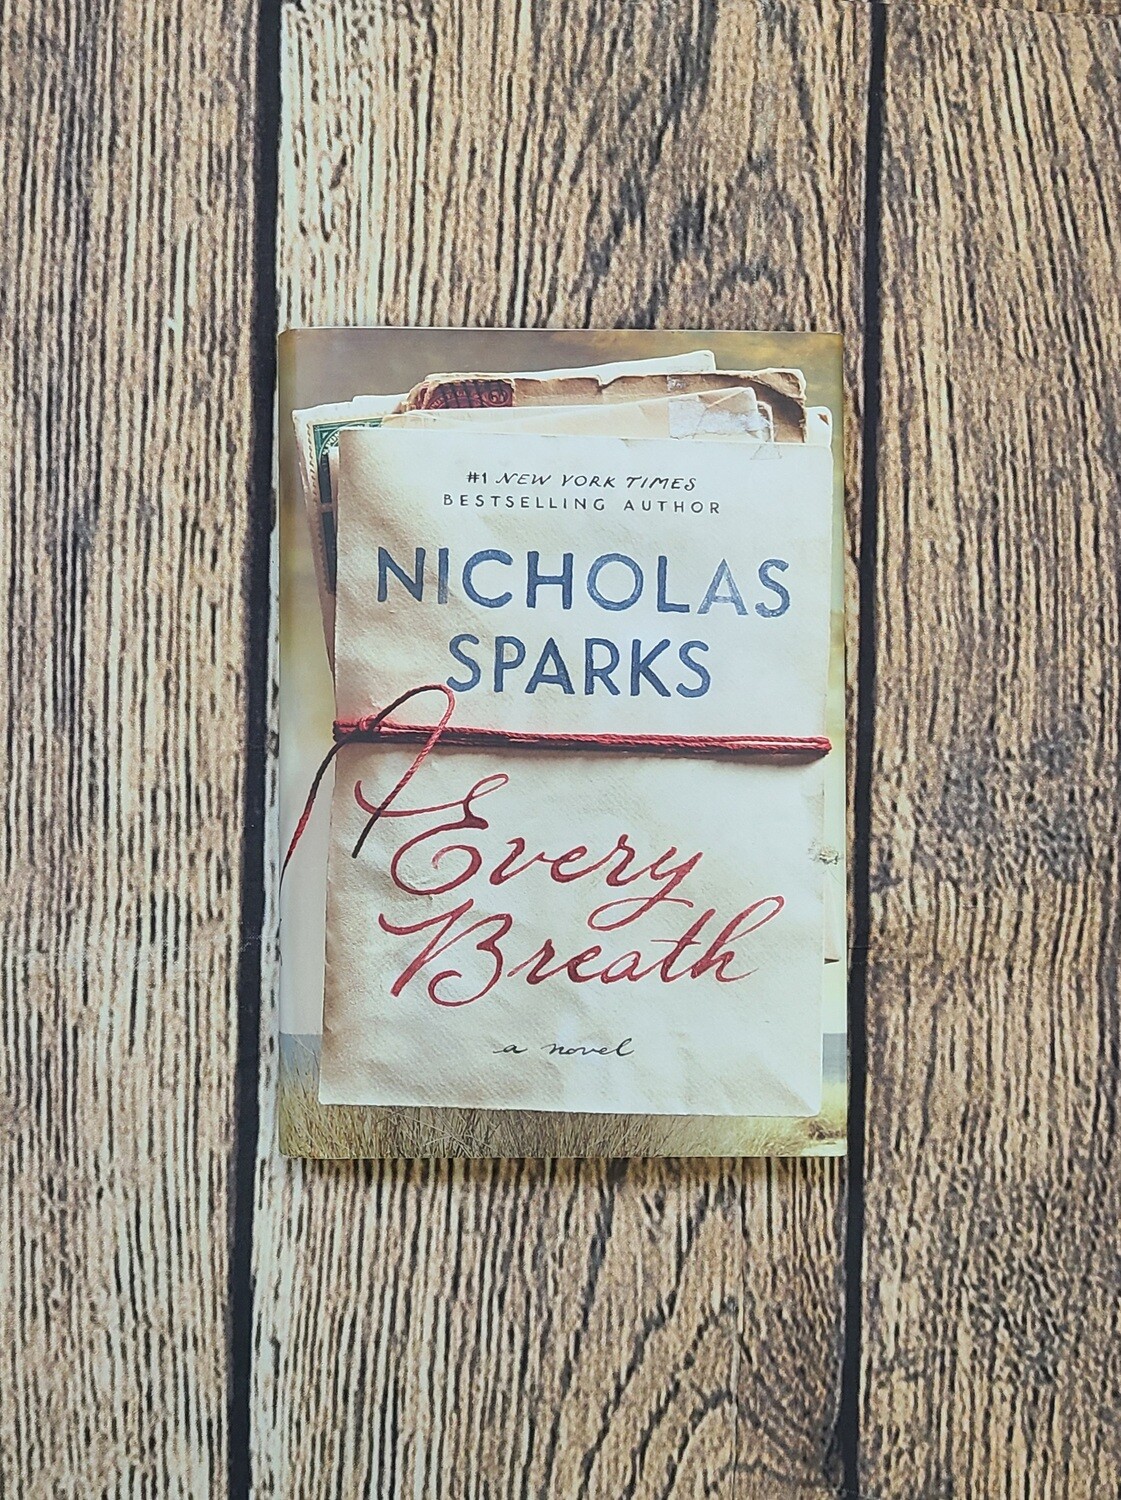 Every Breath by Nicholas Sparks - Hardback - Great Condition